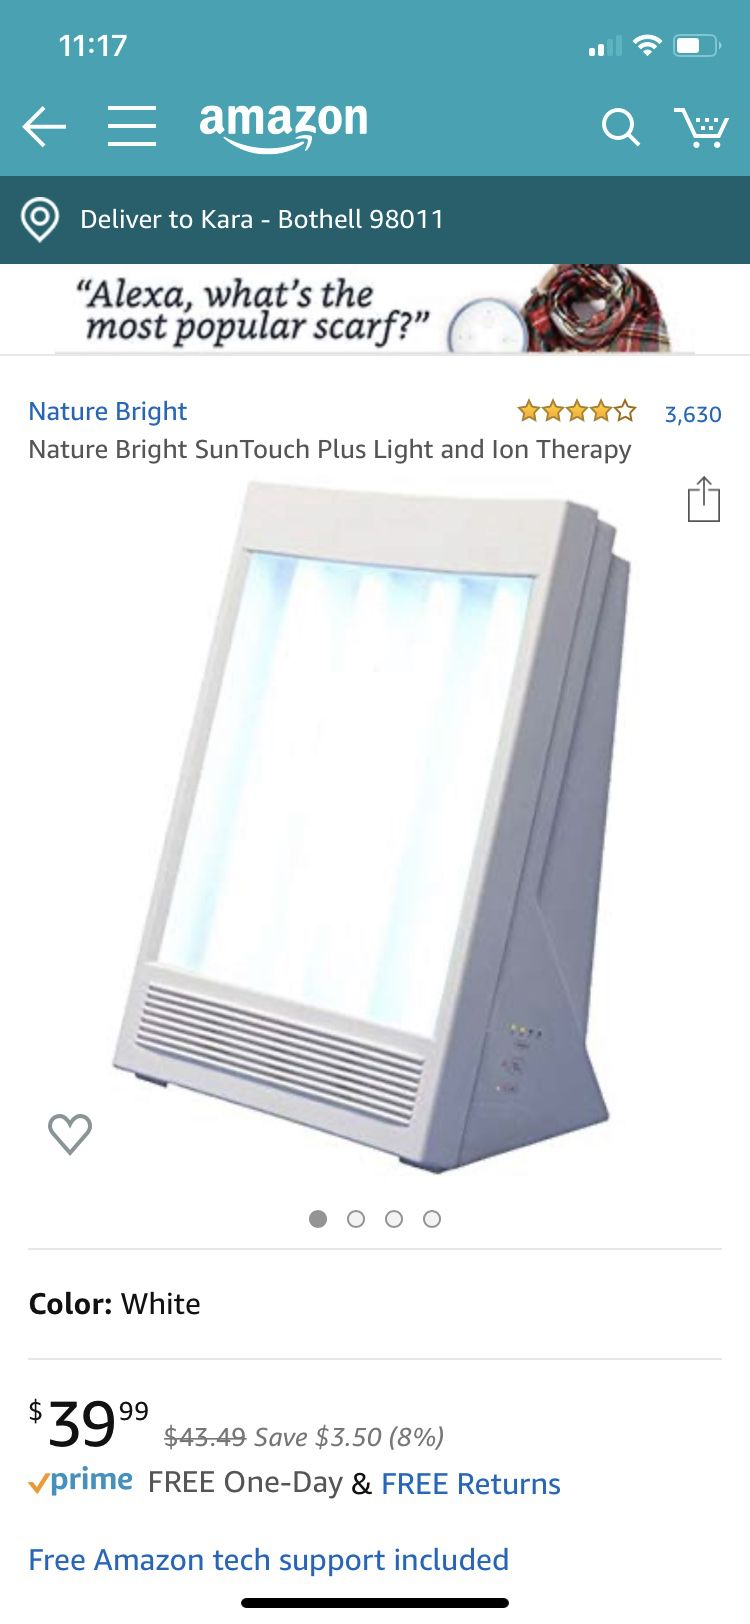 Nature Bright SunTouch Plus Light and Ion Therapy